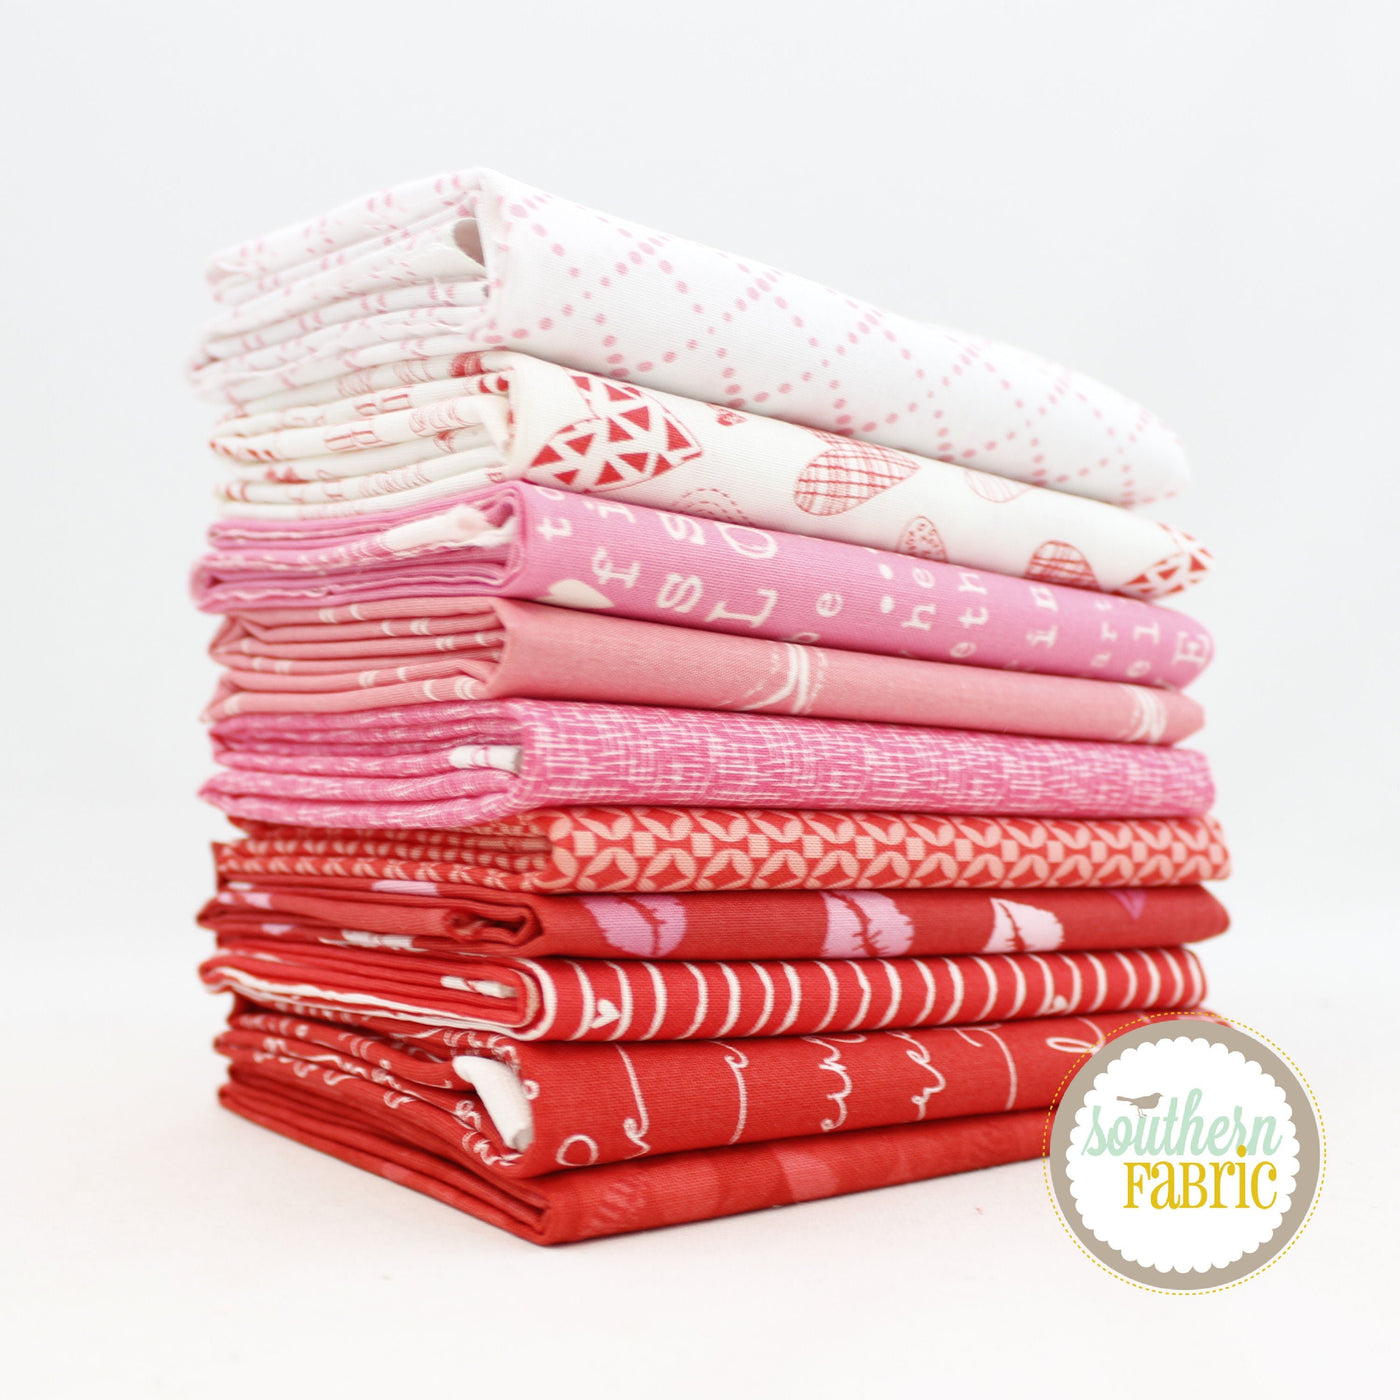 Valentines Fat Quarter Bundle (10 pcs) by Mixed Designers for Southern Fabric (VALENTINE.FQ)